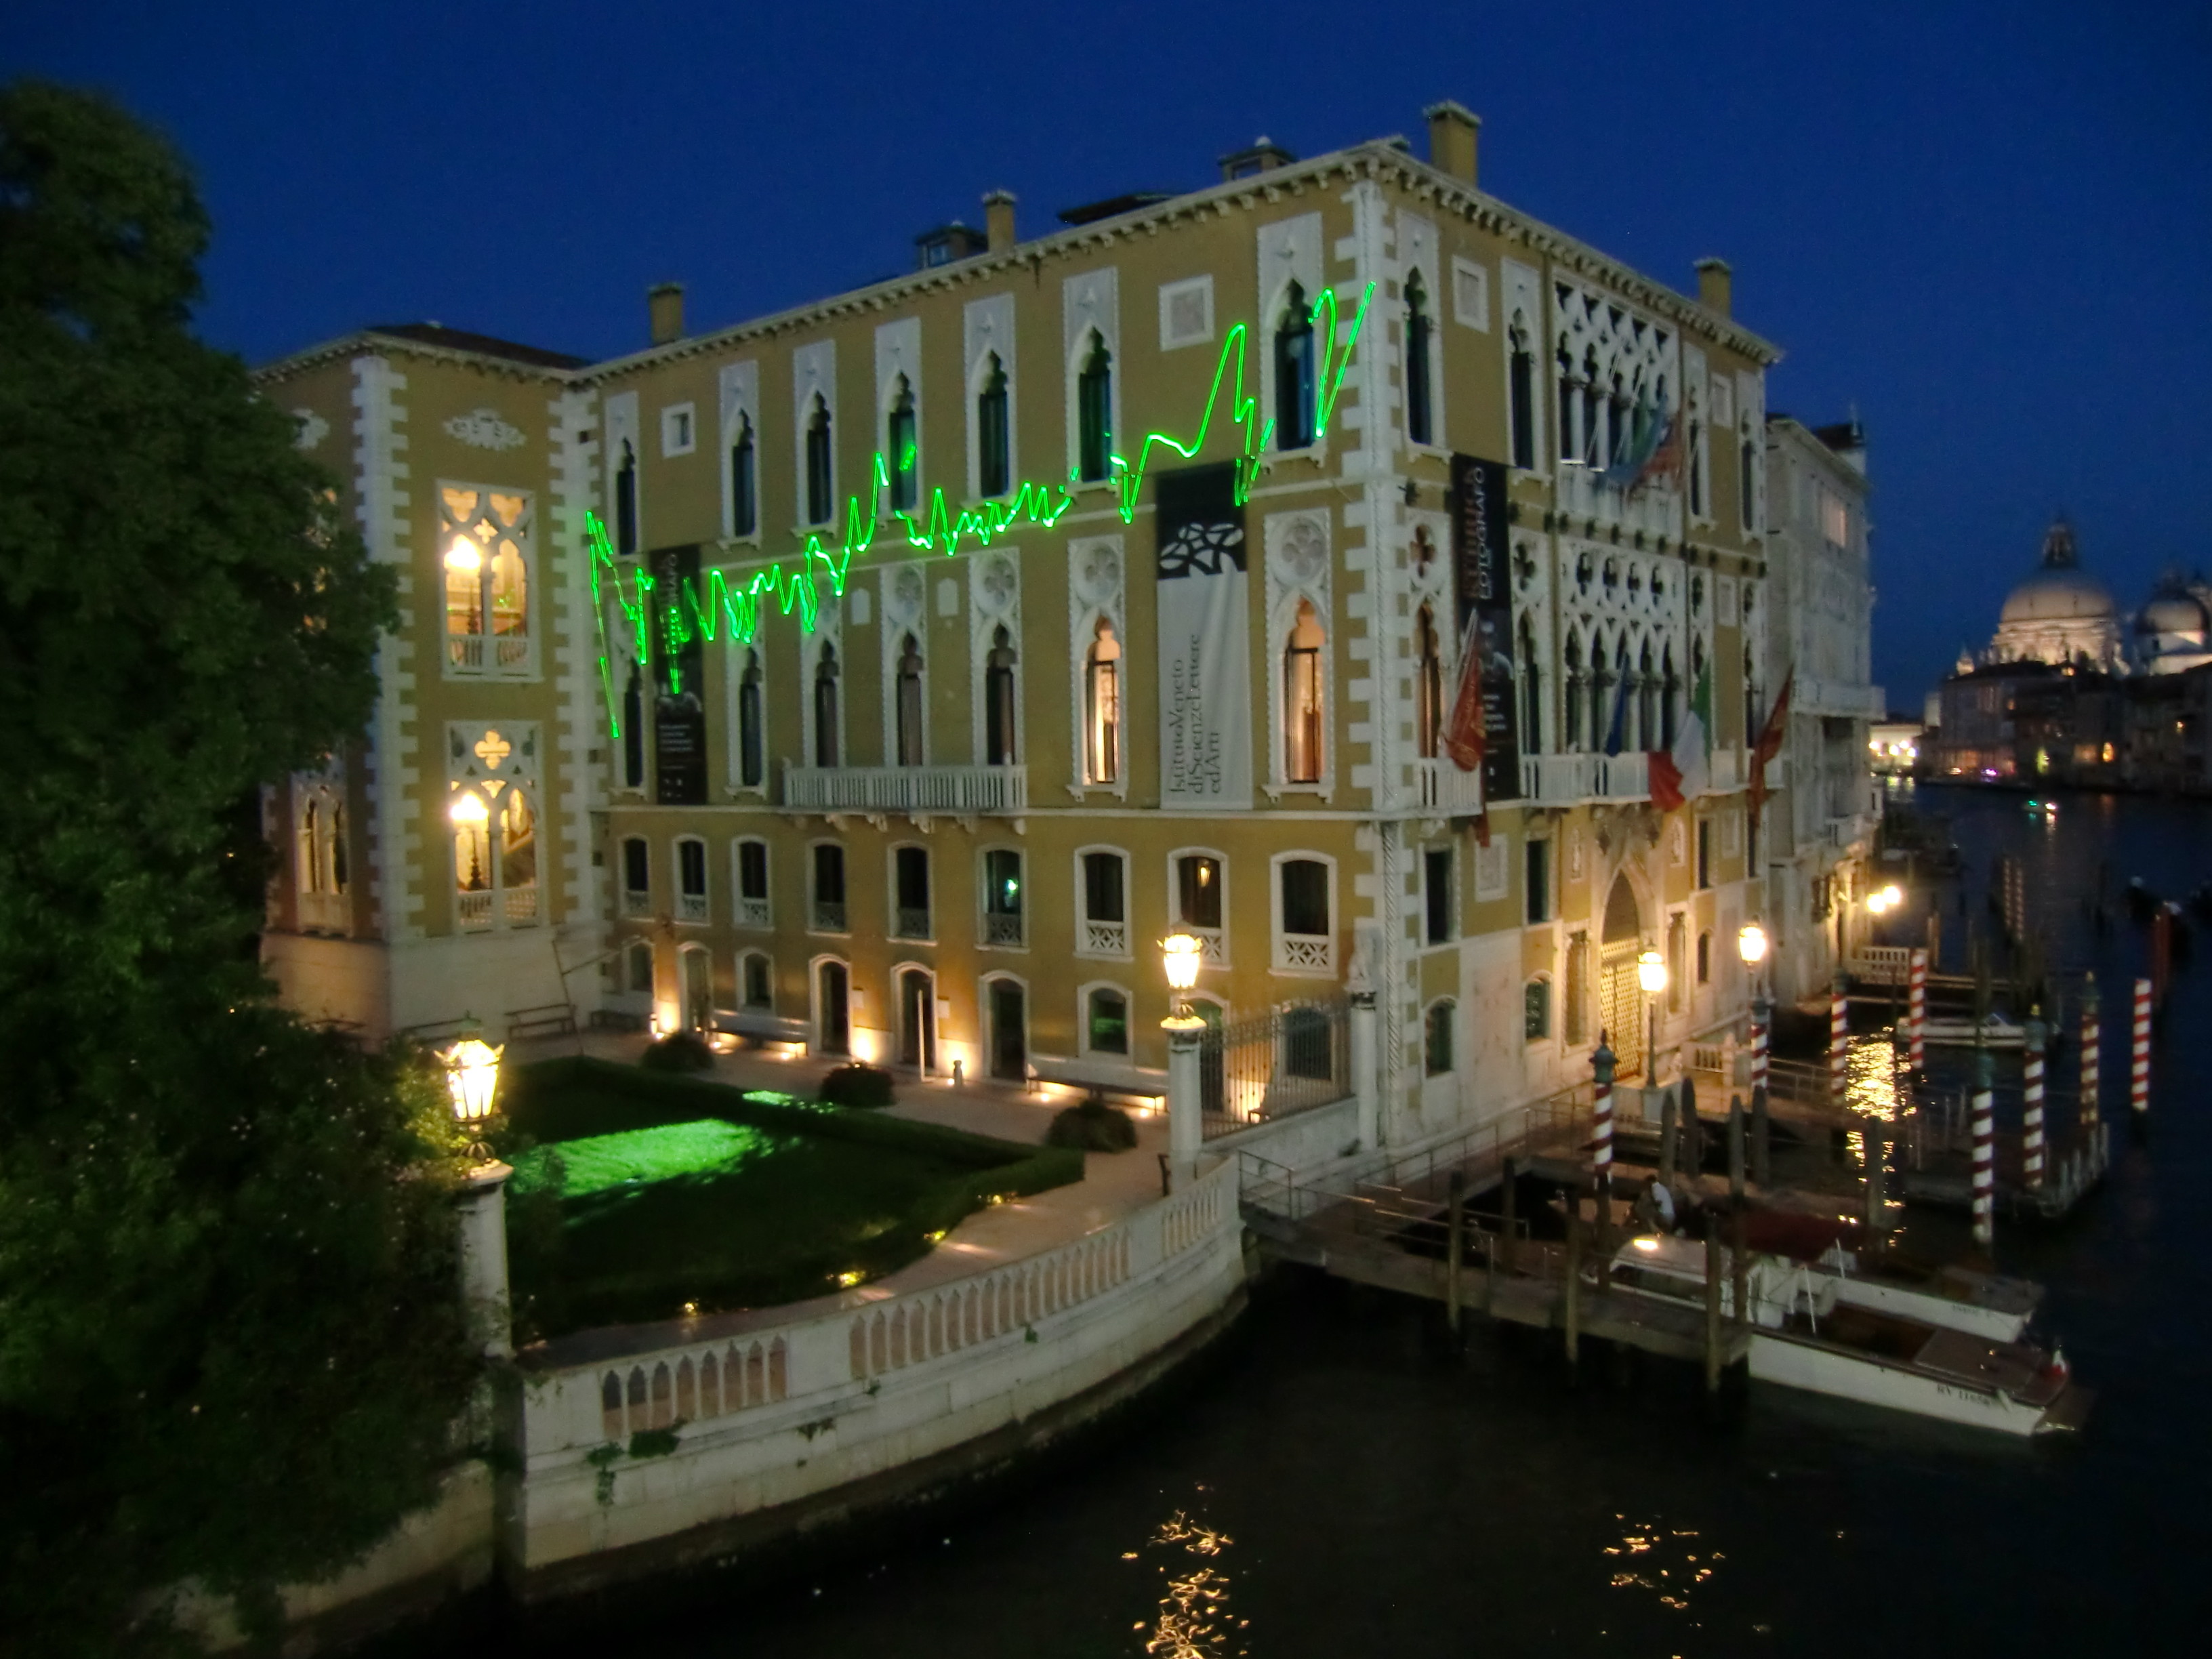 A jagged green line of laser light, resembling an EKG, plays across the face of a yellow and white building on the Venice canals at night.